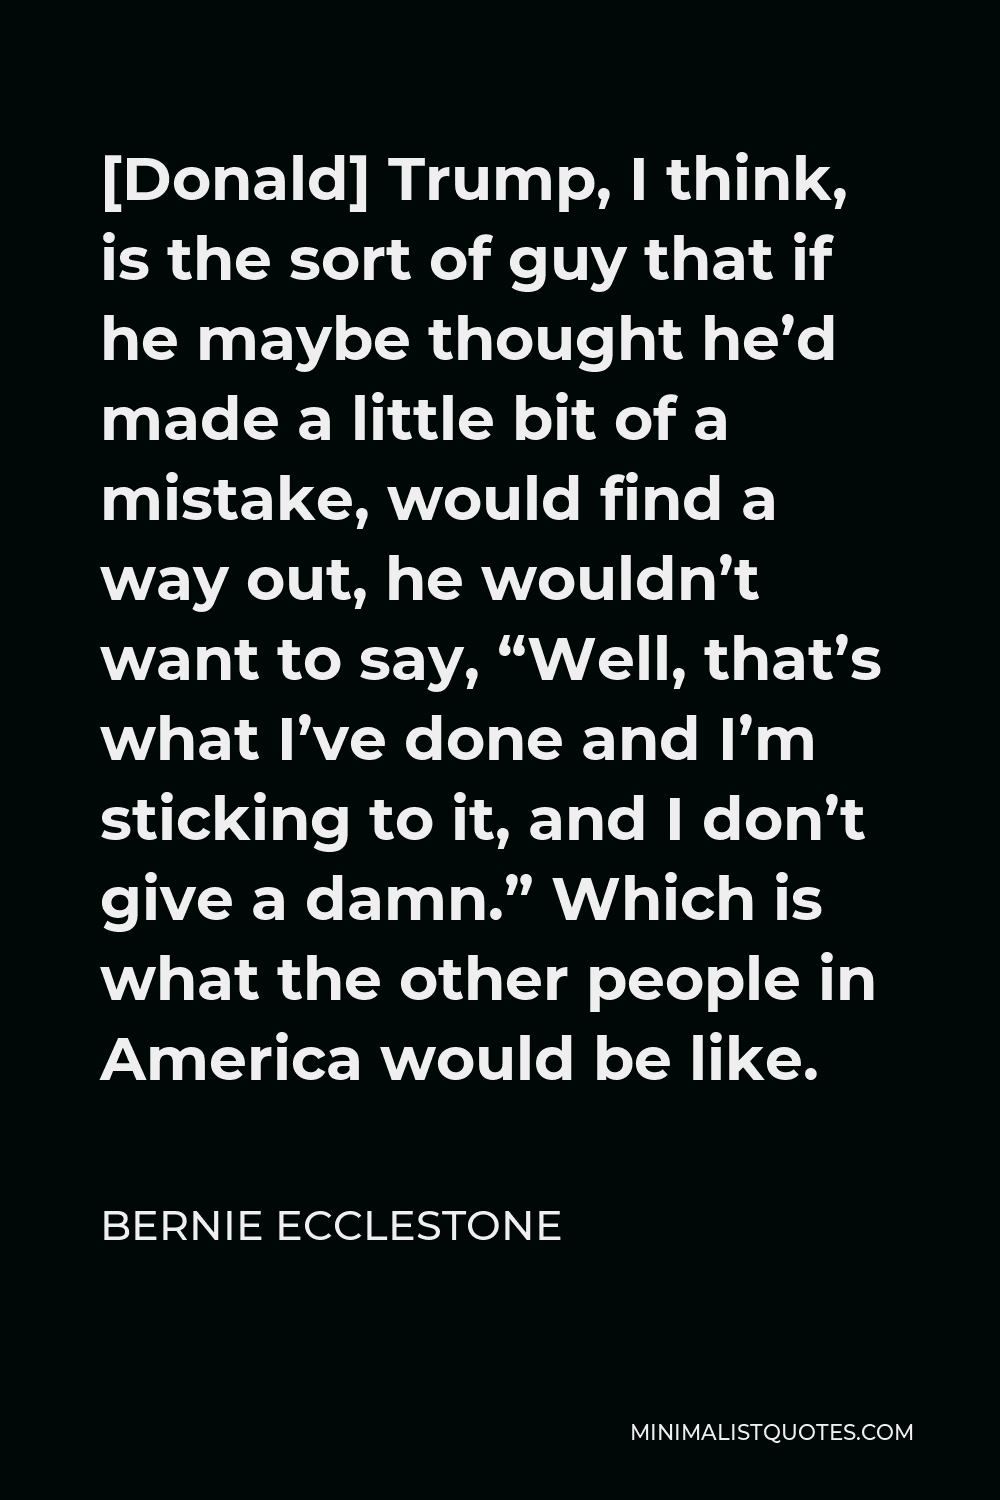 Bernie Ecclestone Quote - [Donald] Trump, I think, is the sort of guy that if he maybe thought he’d made a little bit of a mistake, would find a way out, he wouldn’t want to say, “Well, that’s what I’ve done and I’m sticking to it, and I don’t give a damn.” Which is what the other people in America would be like.